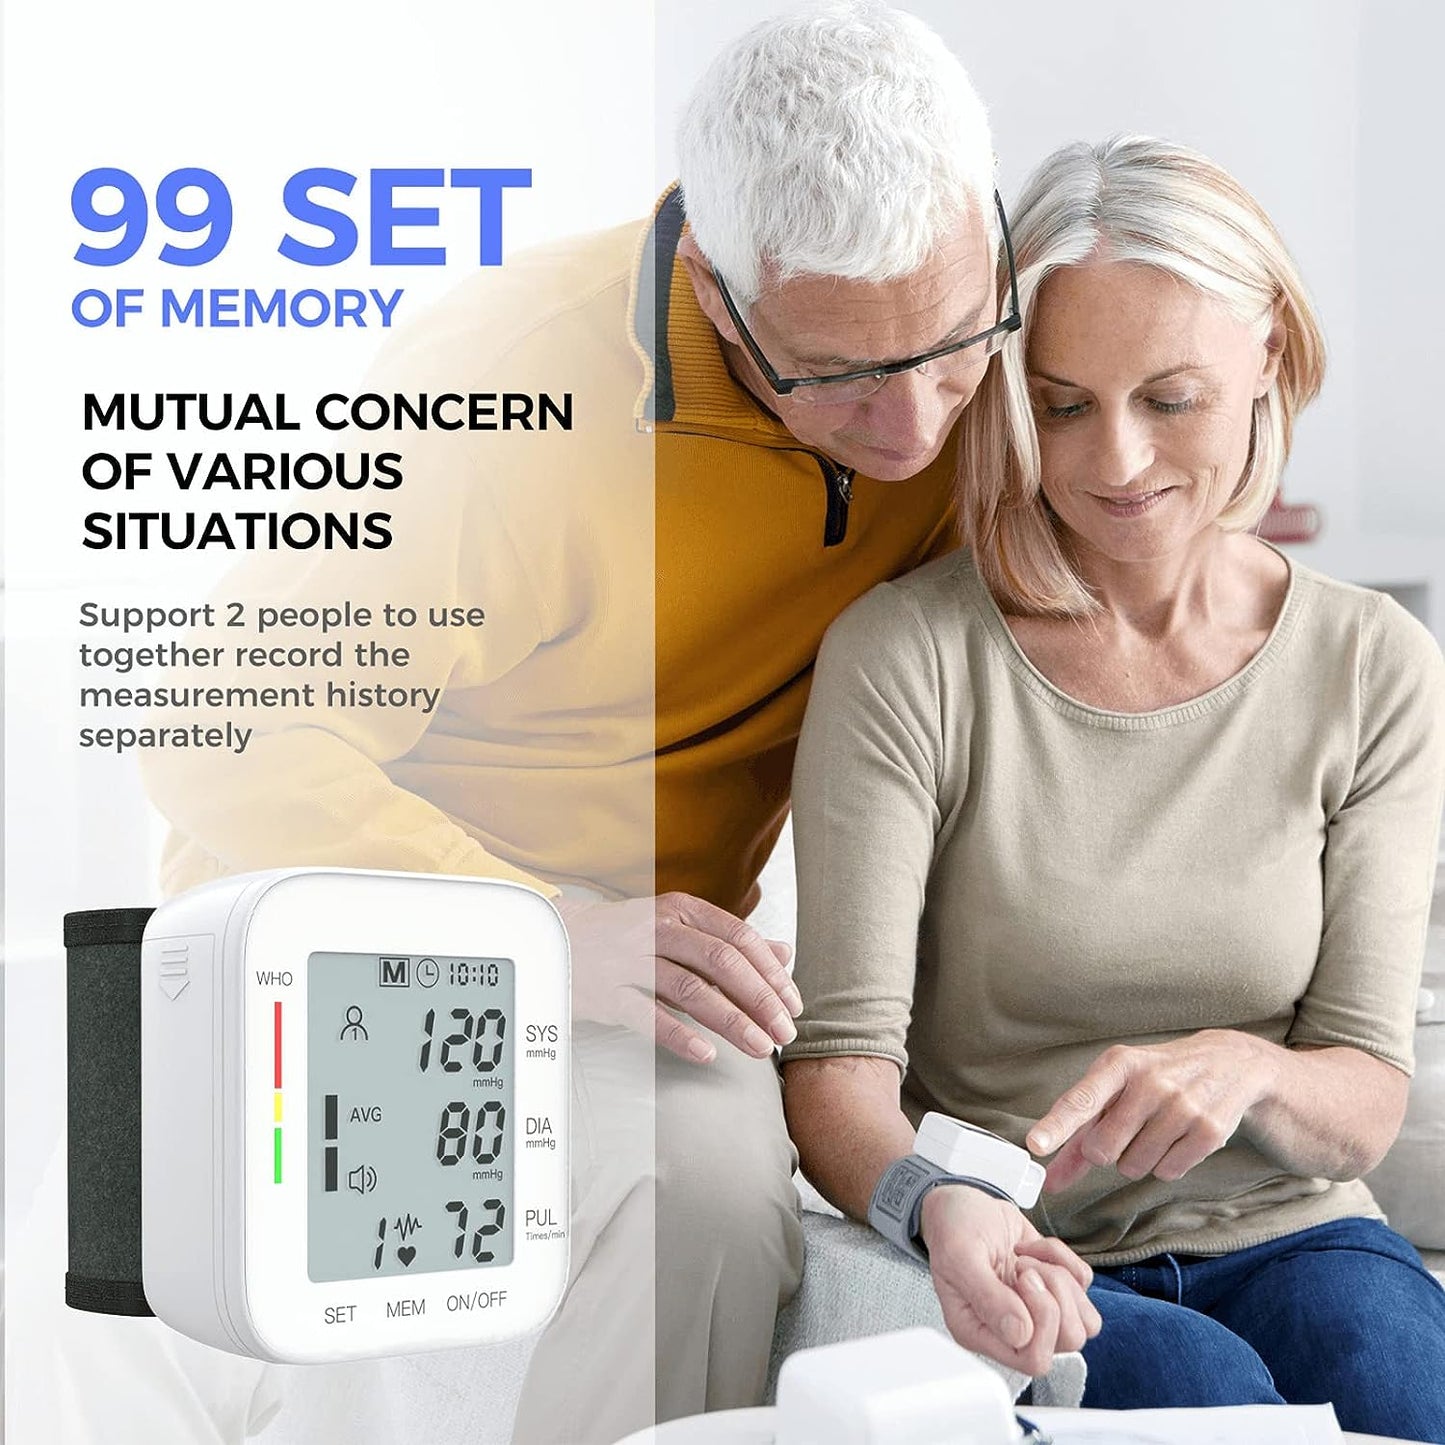 MMIZOO Wrist Blood Pressure Monitor Bp Monitor Large LCD Display Blood Pressure Machine Adjustable Wrist Cuff 5.31-7.68inch Automatic 99x2 Sets Memory with Carrying Case for Home Use (W1681)